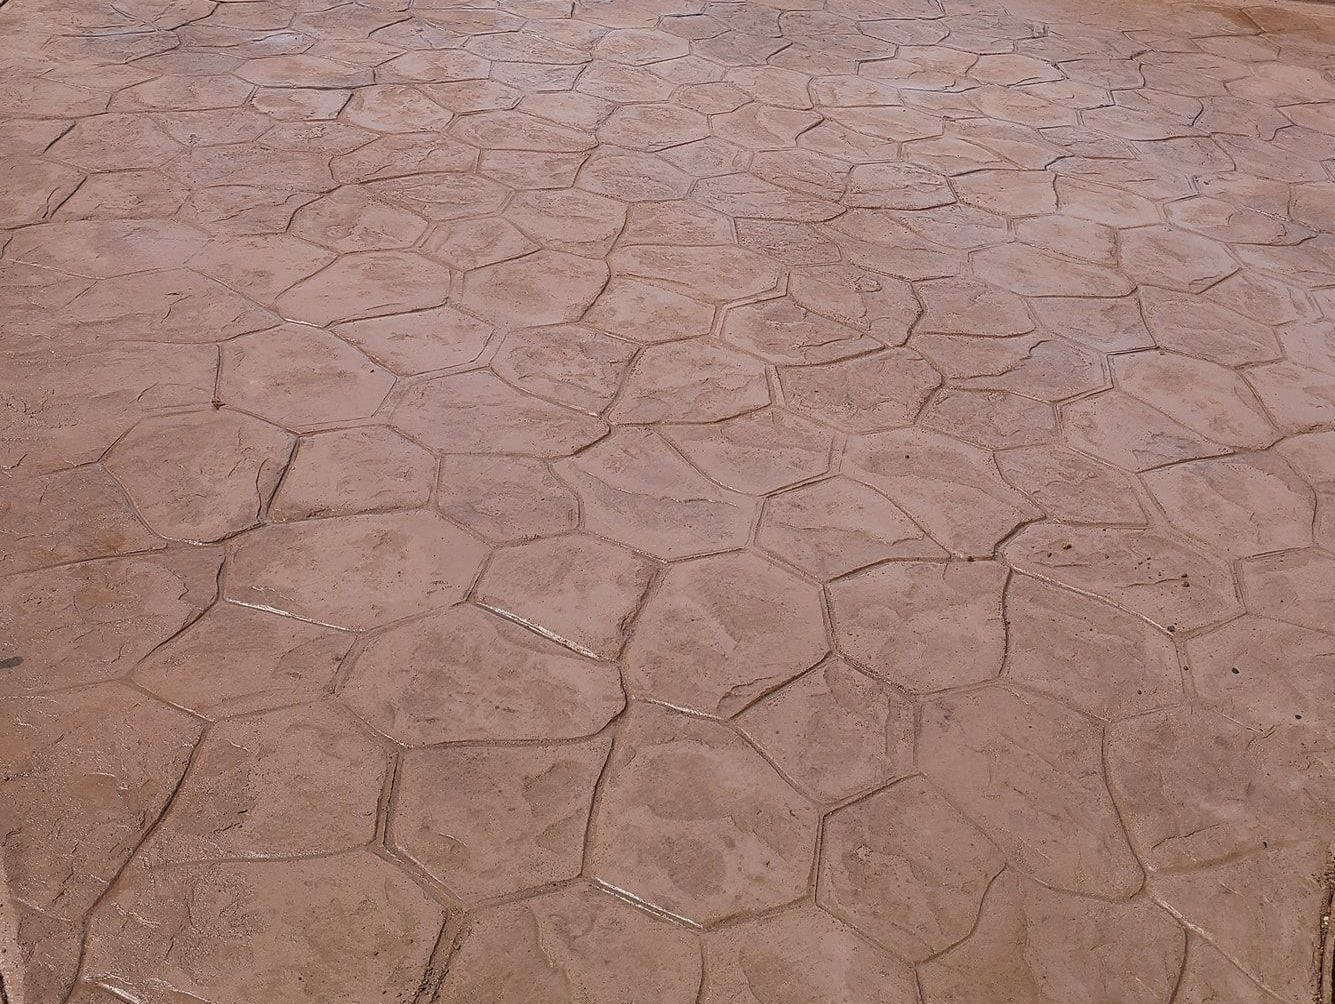 A close up of a concrete floor with a geometric pattern